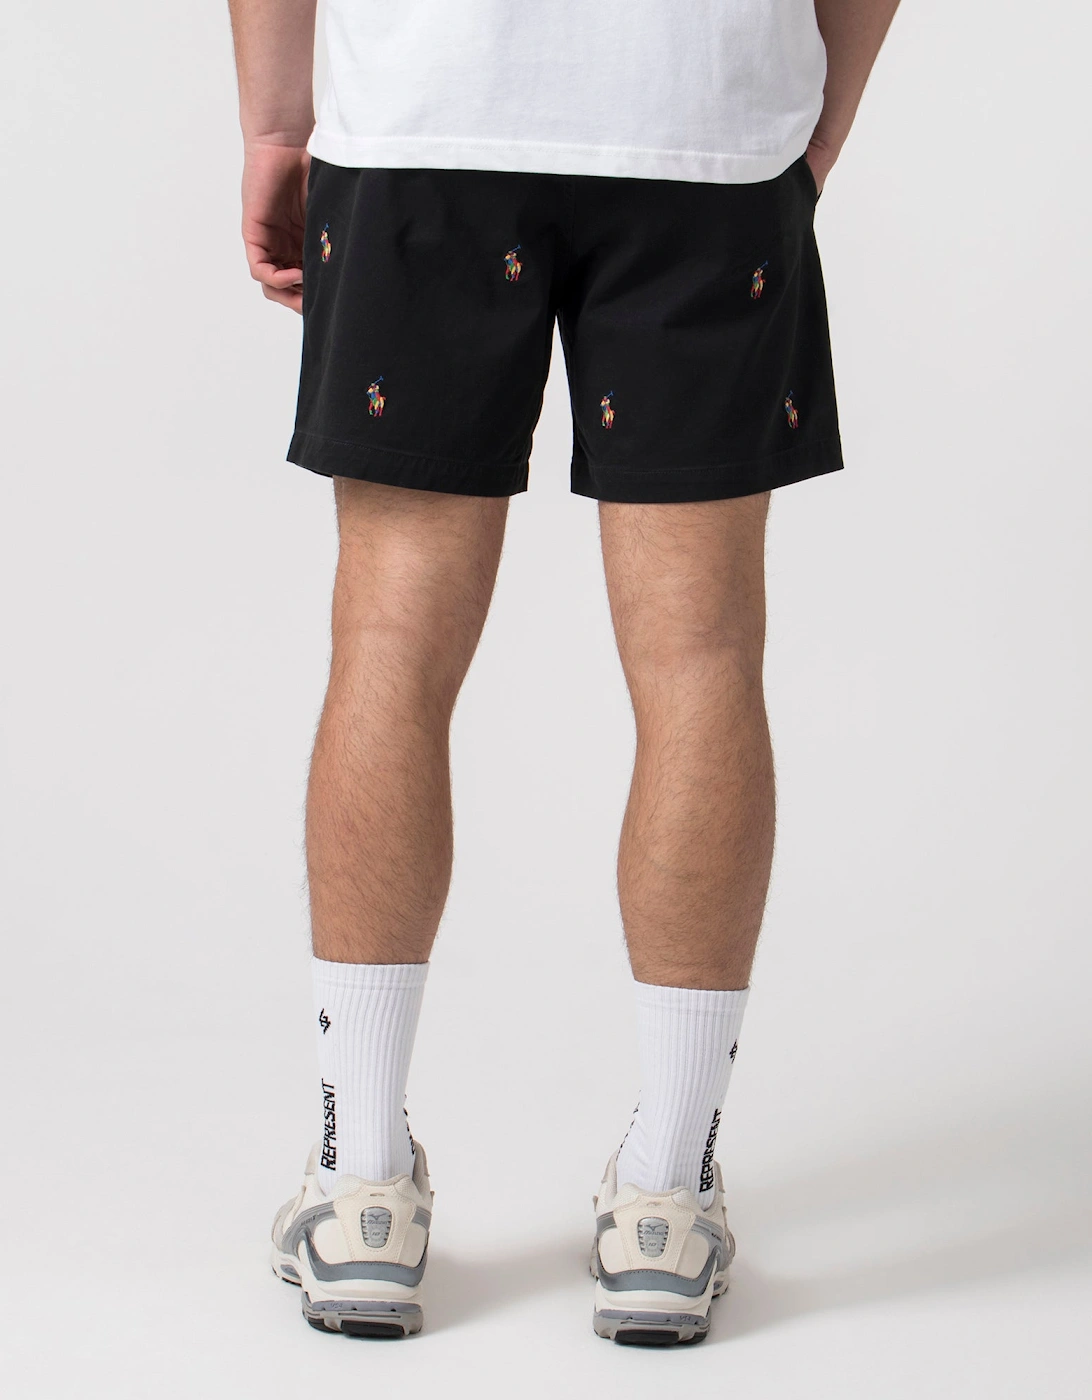 Classic Fit Prepster Shorts